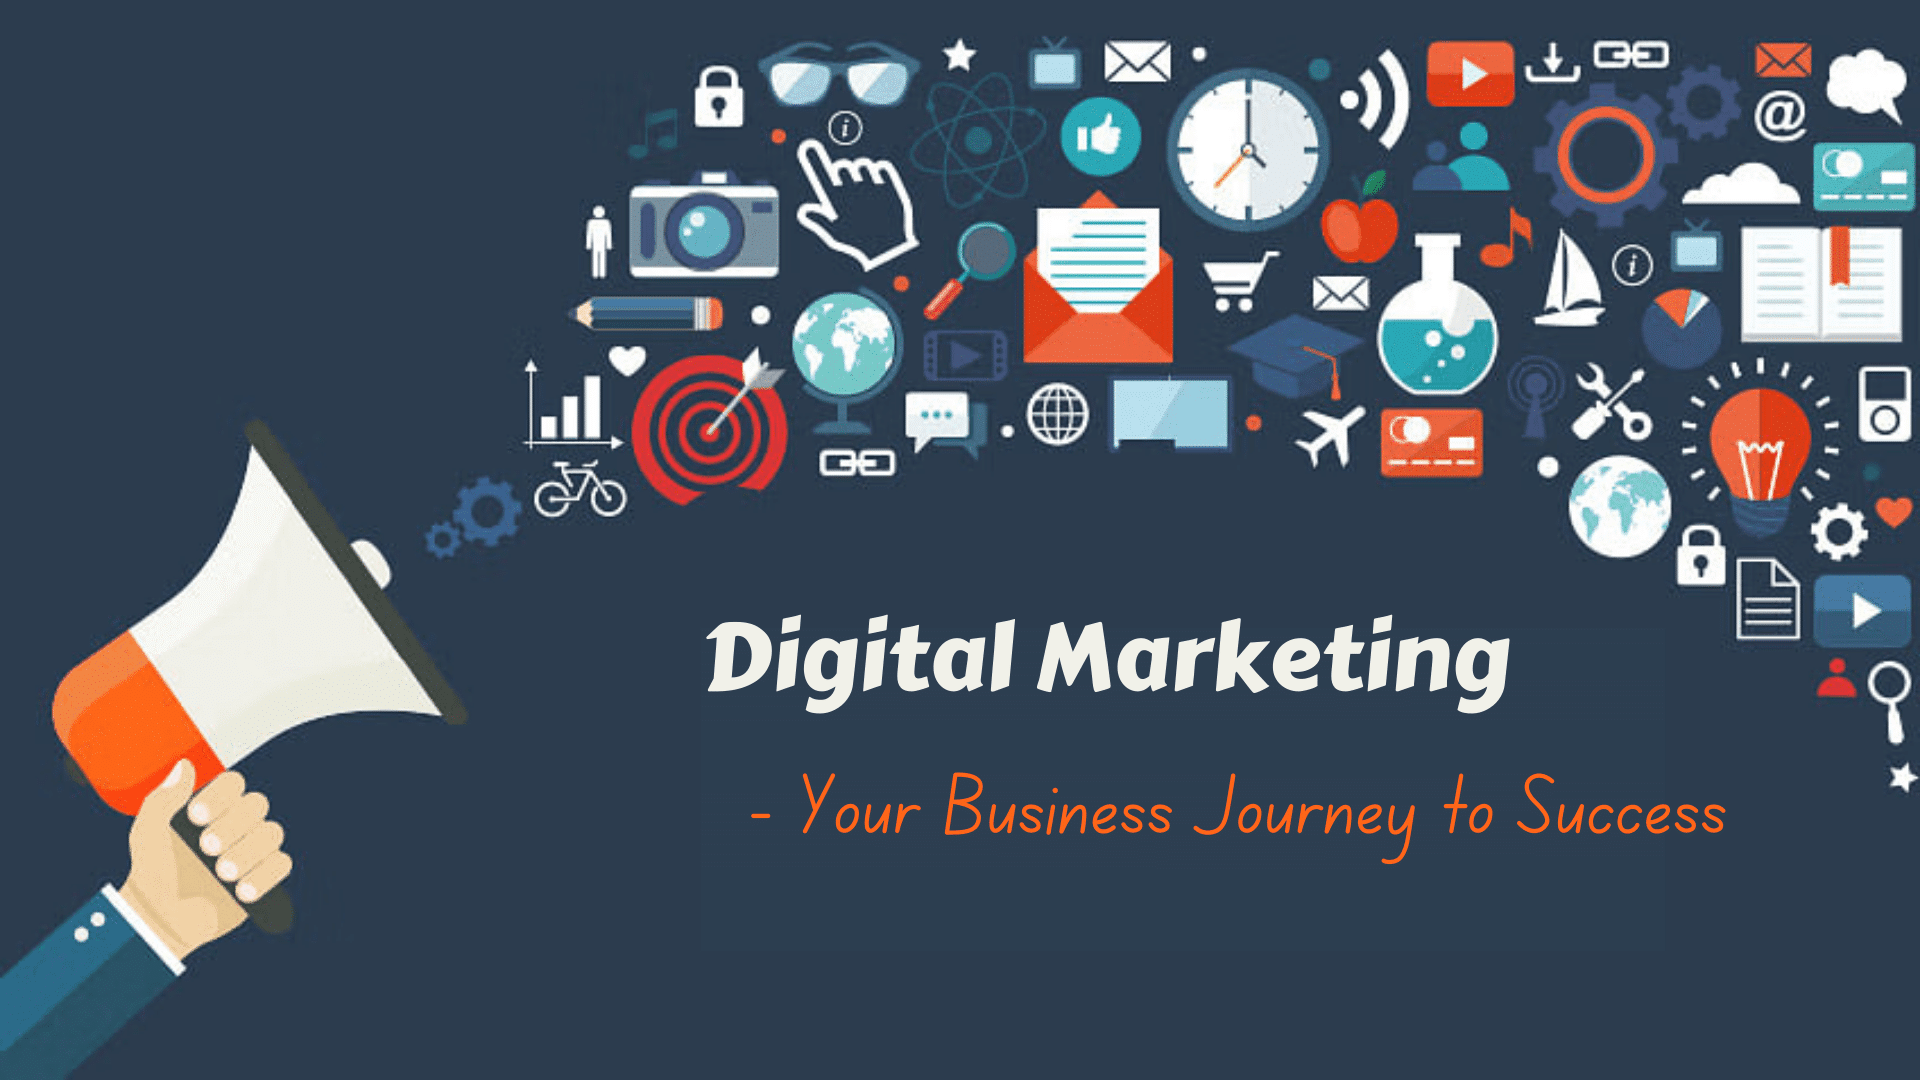 Digital Marketing Agencies - Your Business Journey to Success